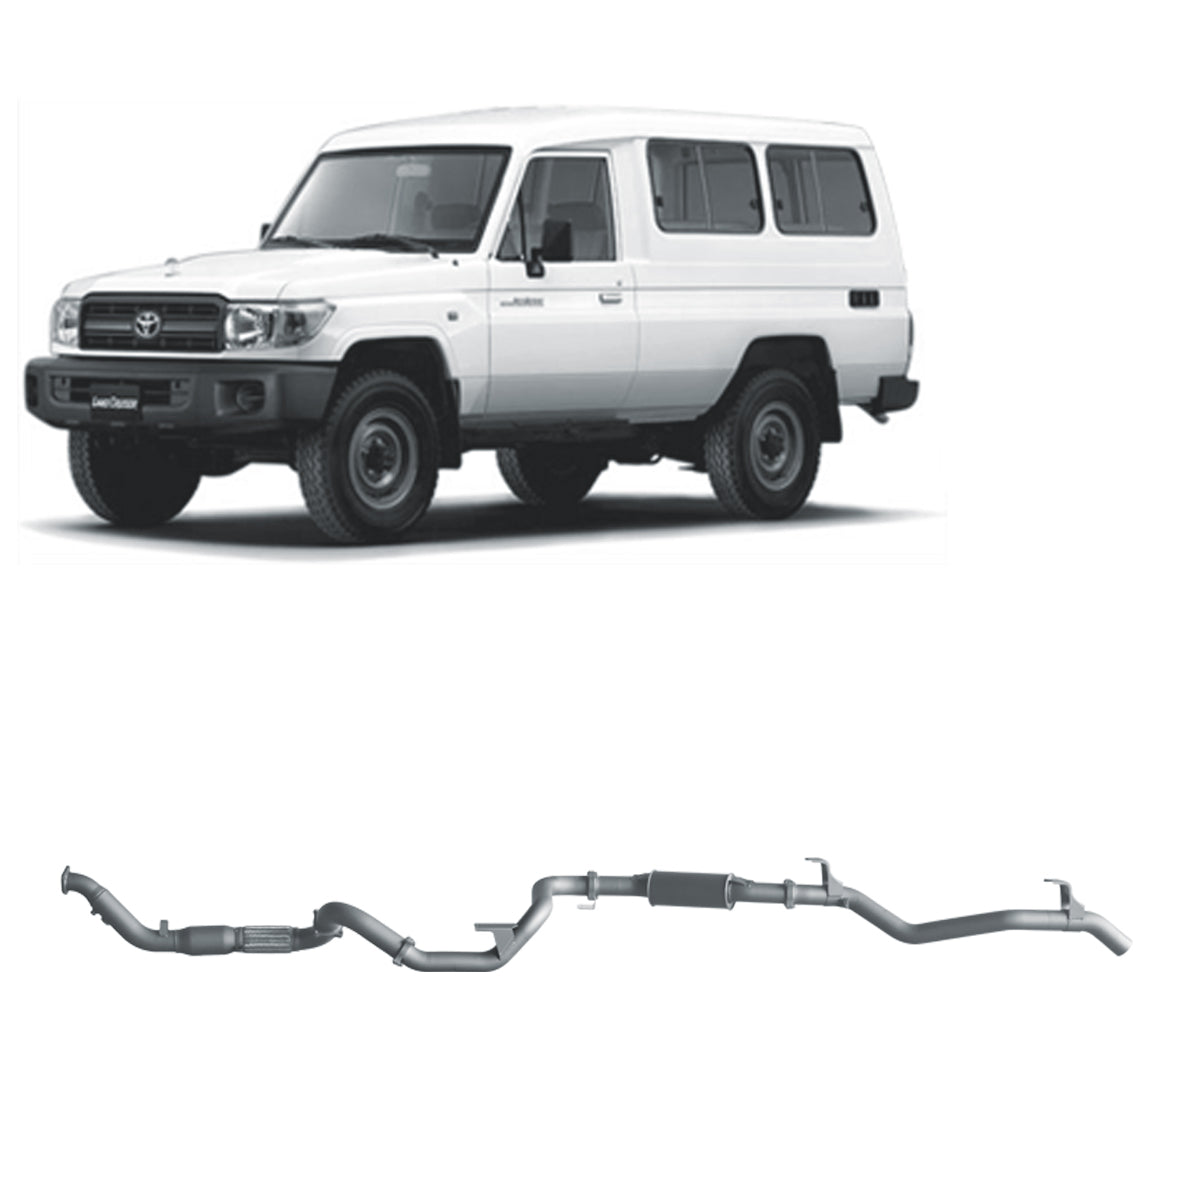 Redback Extreme Duty Exhaust to suit Toyota Landcruiser 78 Series 4.2L TD (01/2001 - 01/2007)